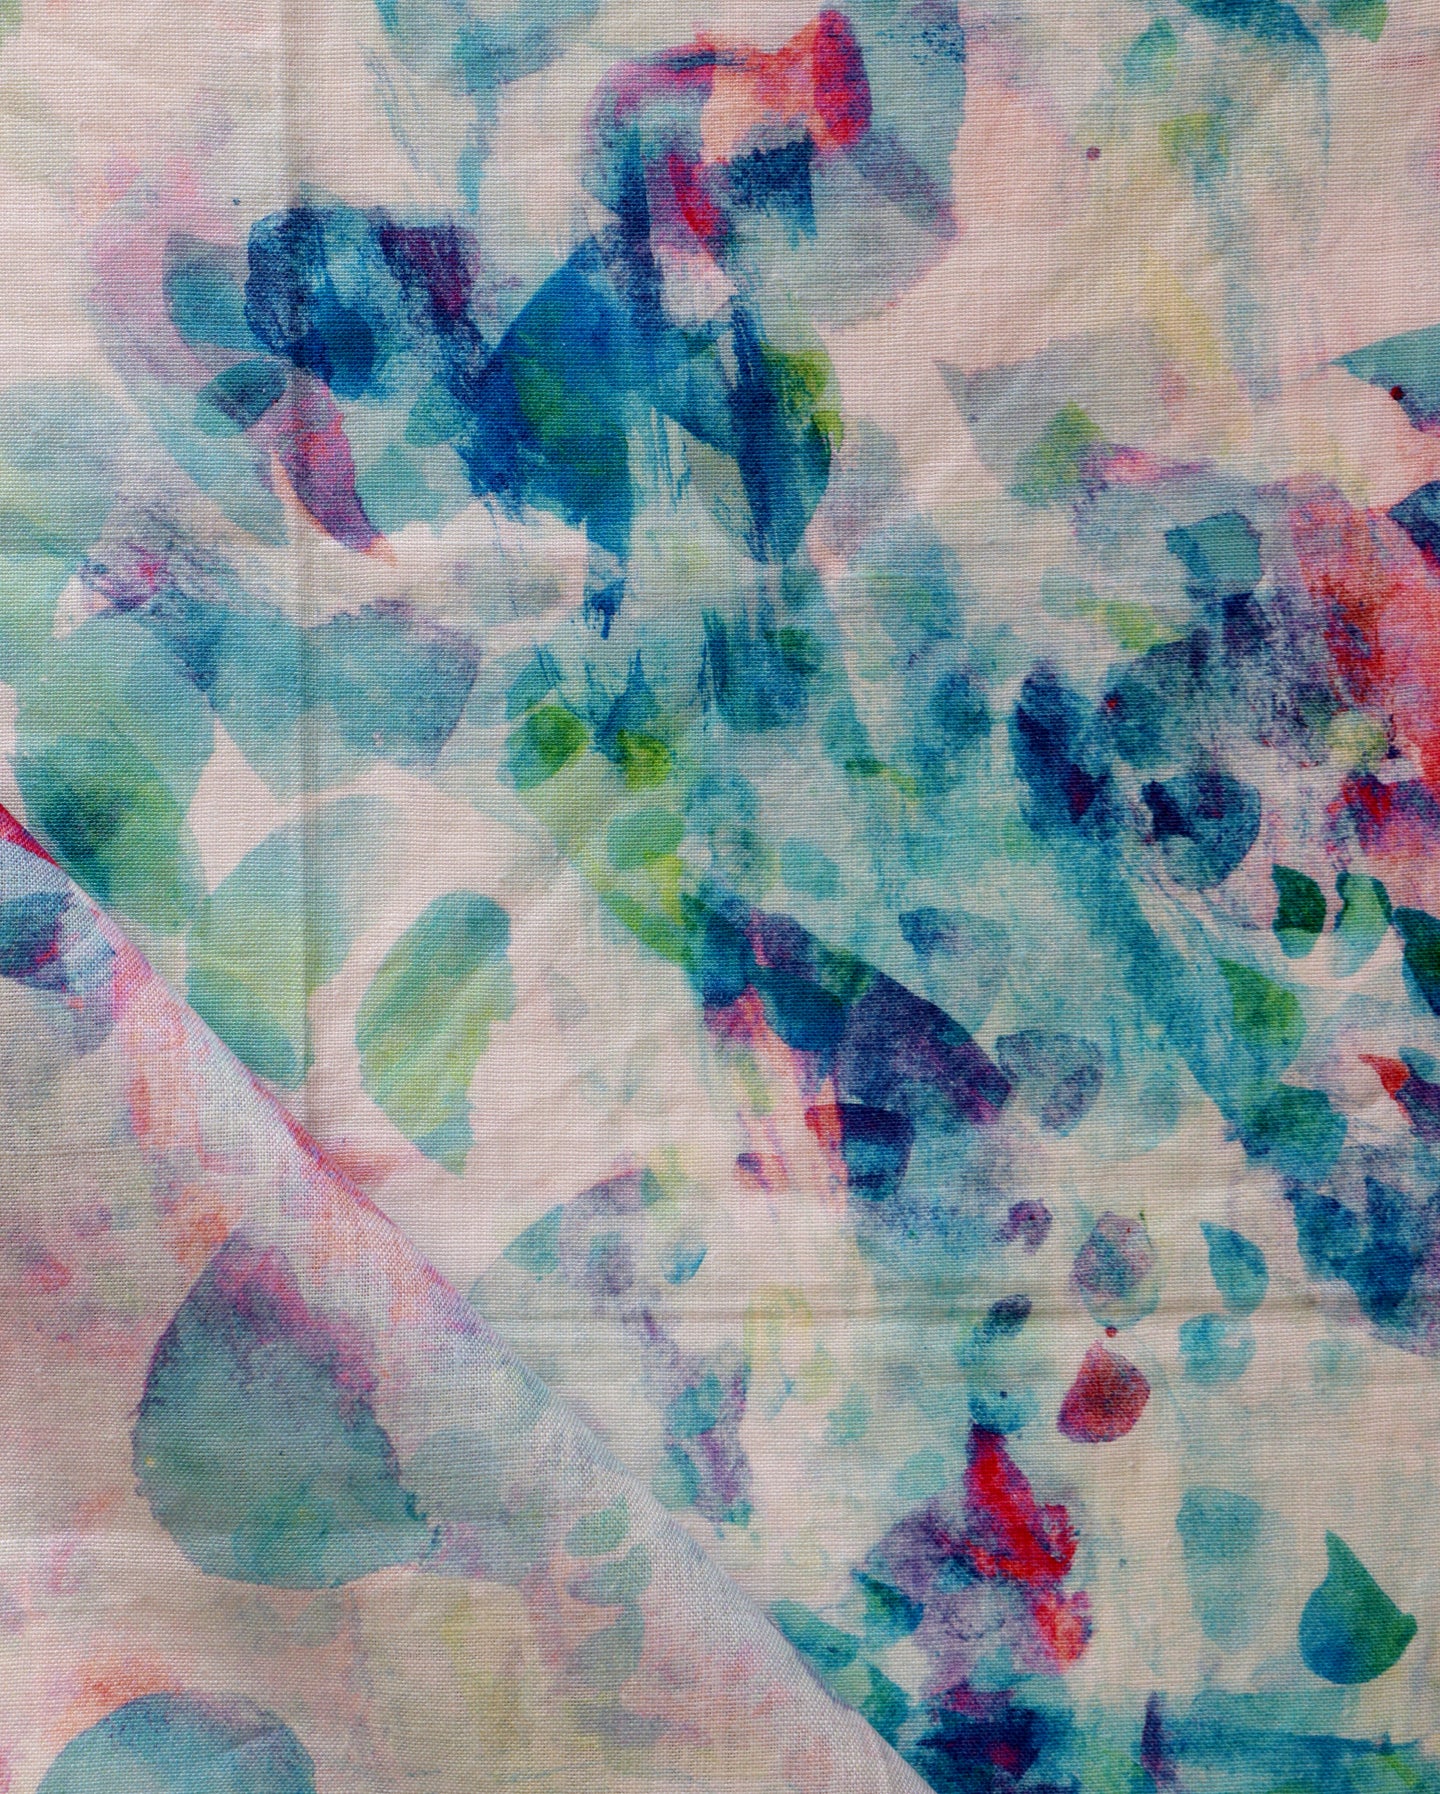 A fabric with blue, pink, and green paint on it